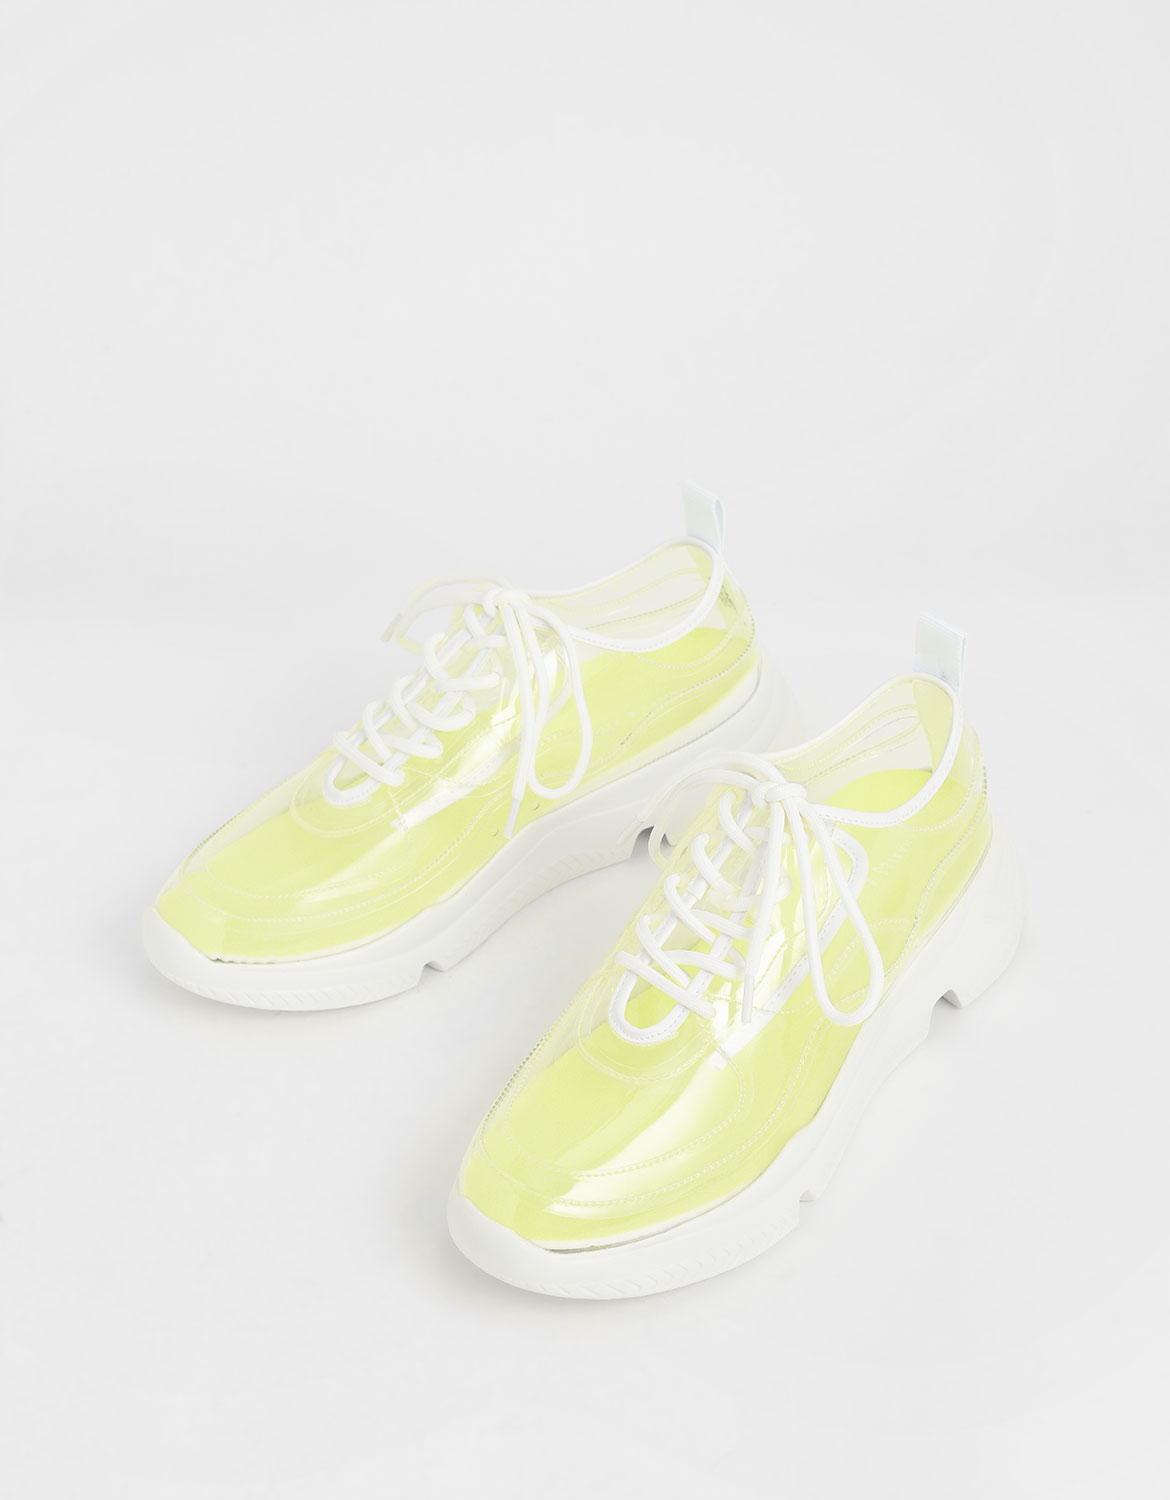 Women’s clear chunky sneakers in white